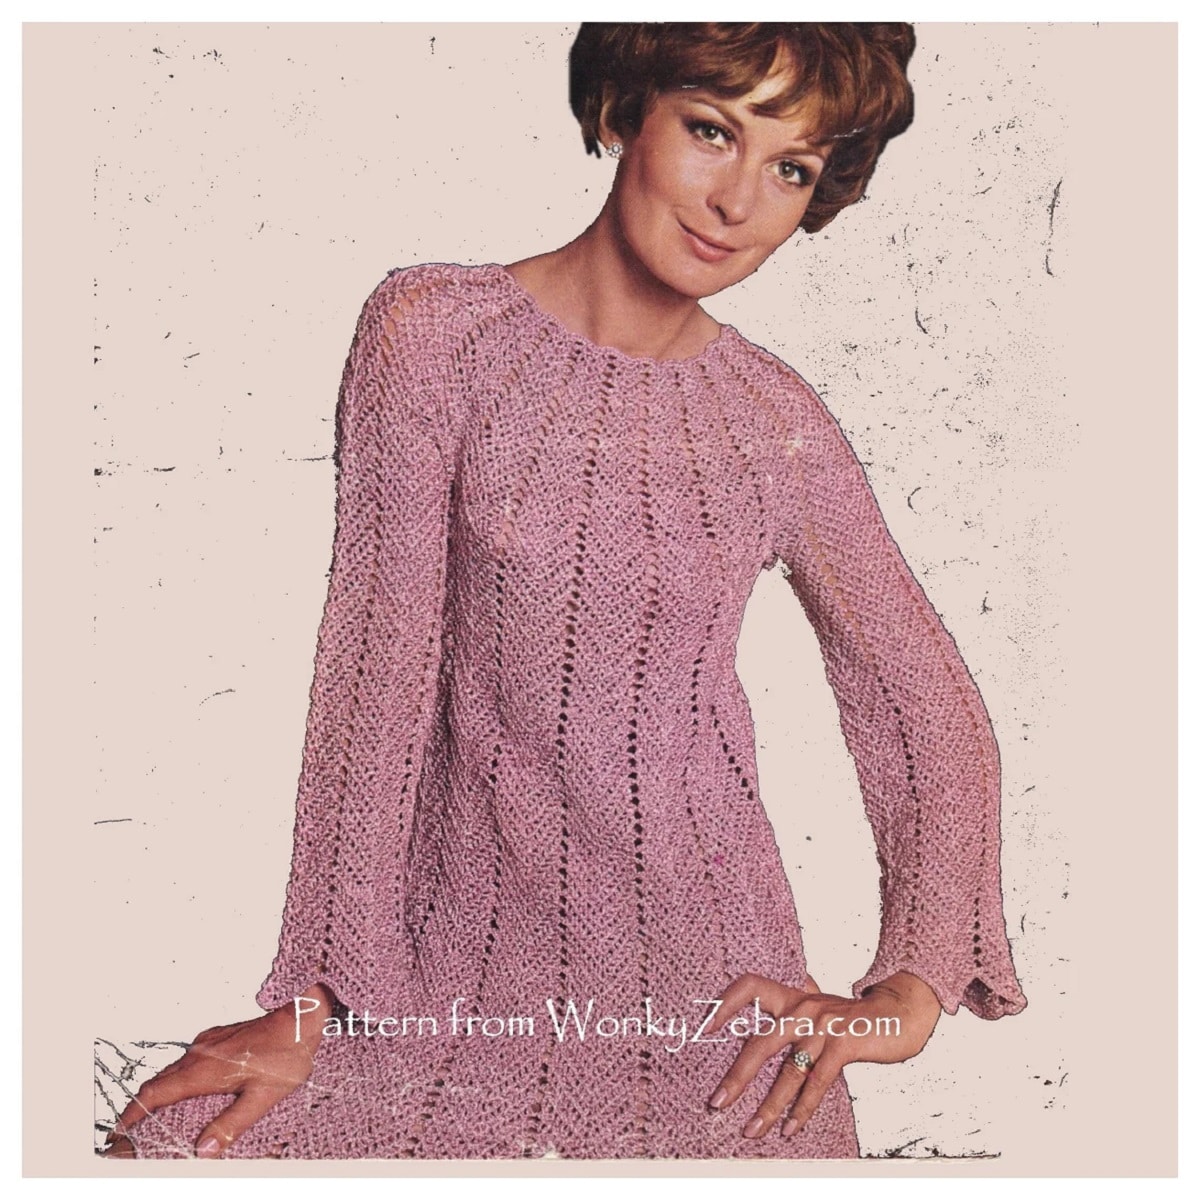 Brunette woman wearing a pink long sleeved crochet mini dress with vertical zig zags on a cream background.